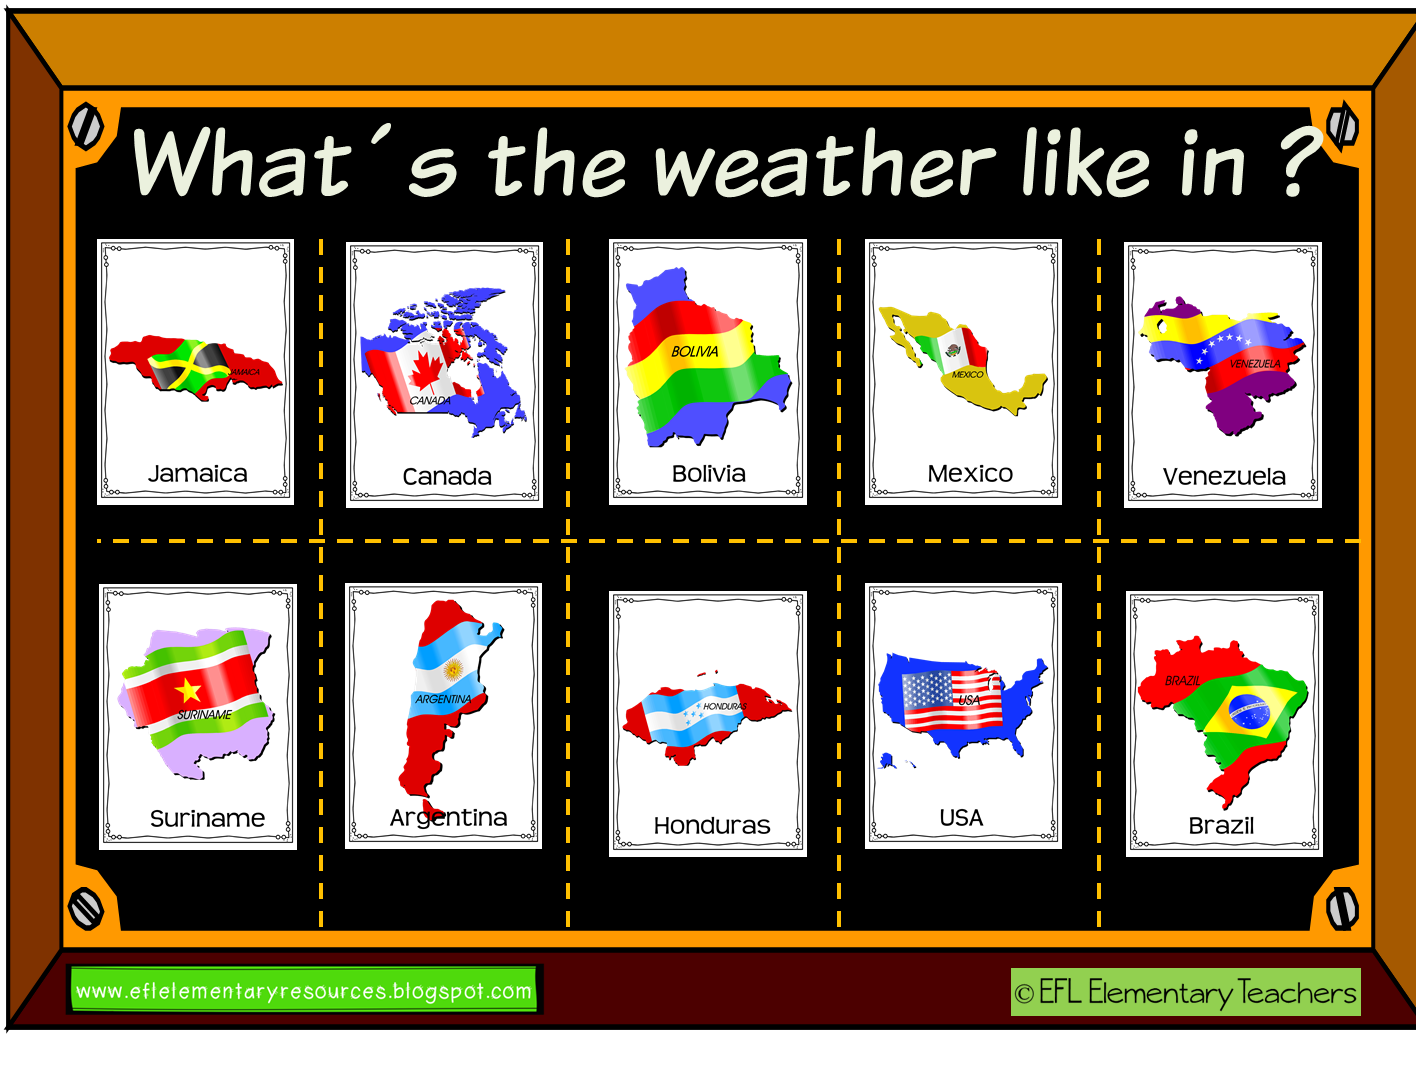 Country differences. The weather in the World. Weather in different Countries. Weather around the World. Weather Forecast around the World.